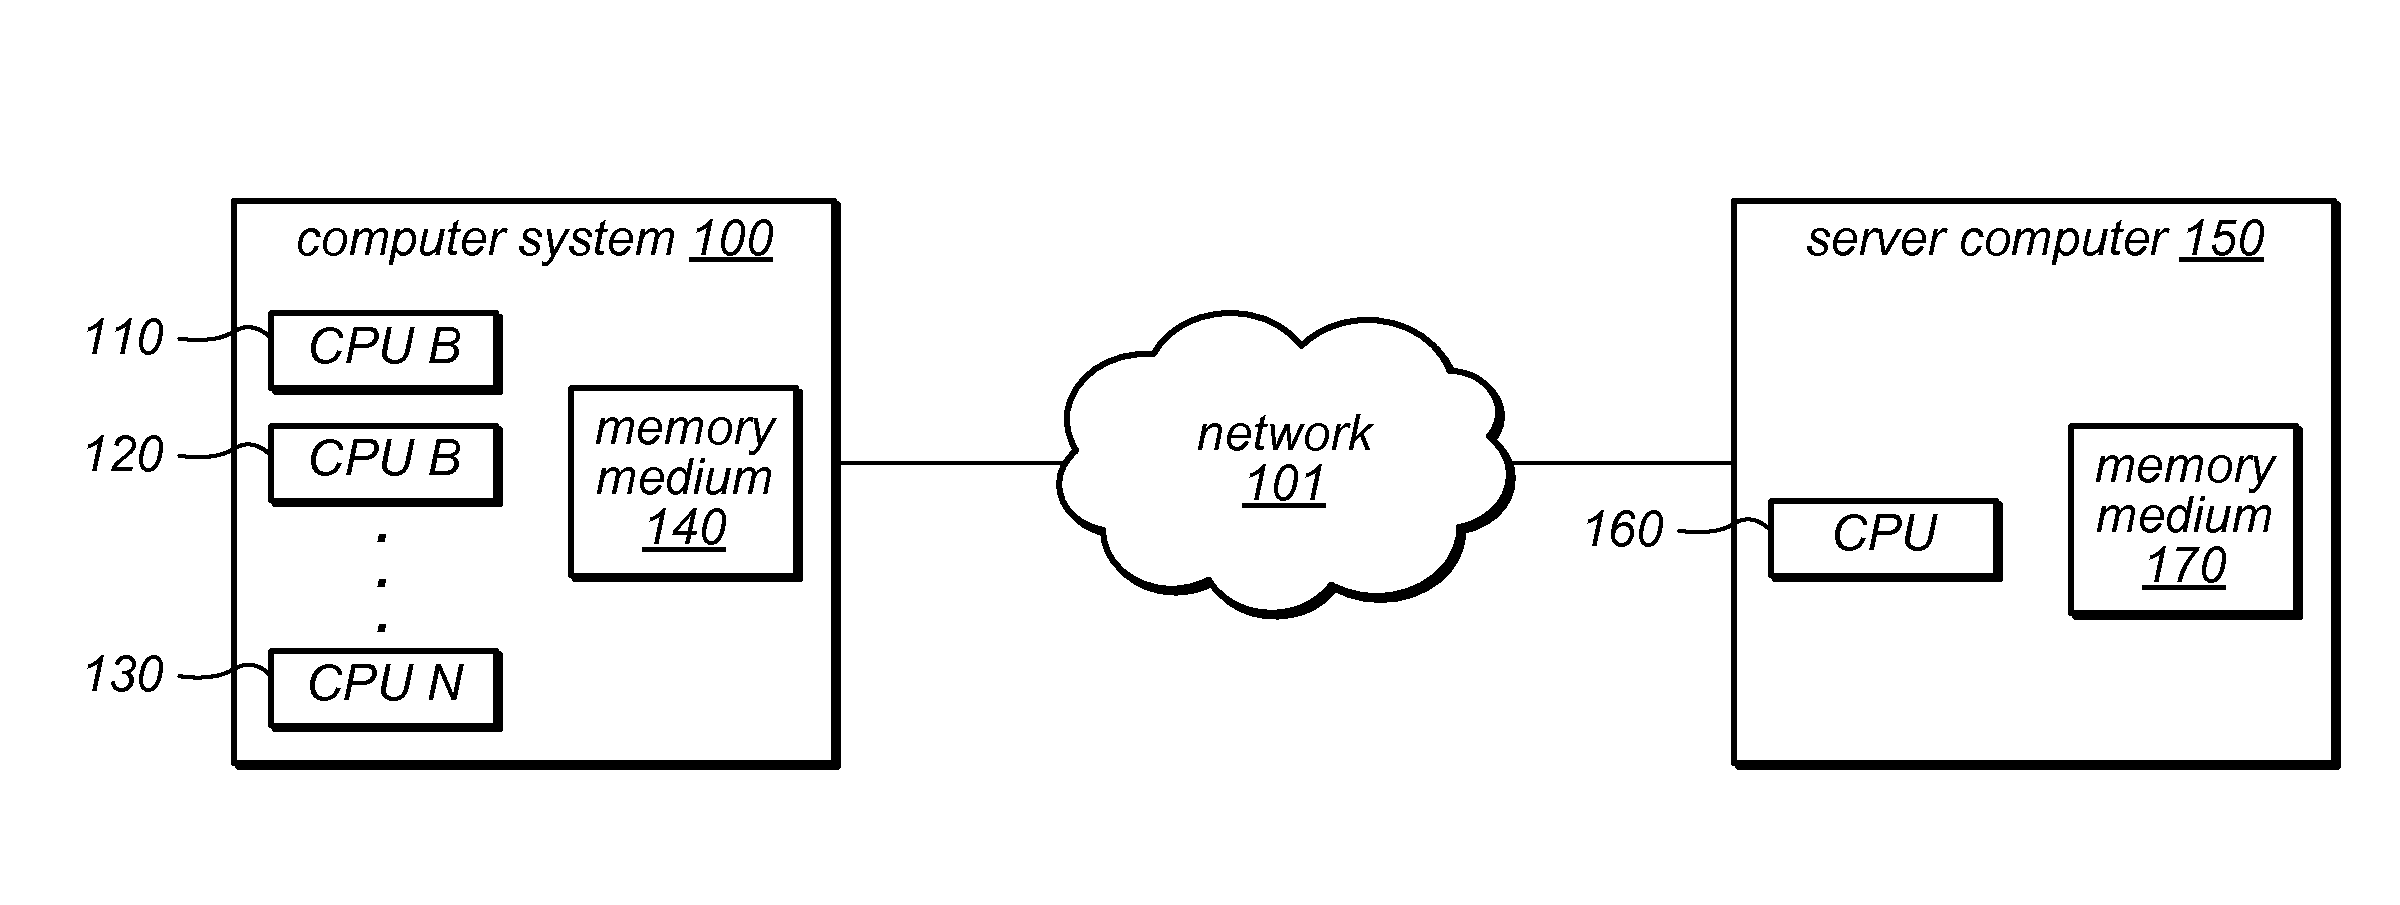 Determining and Downloading Portions of a Software Application in a Computer System